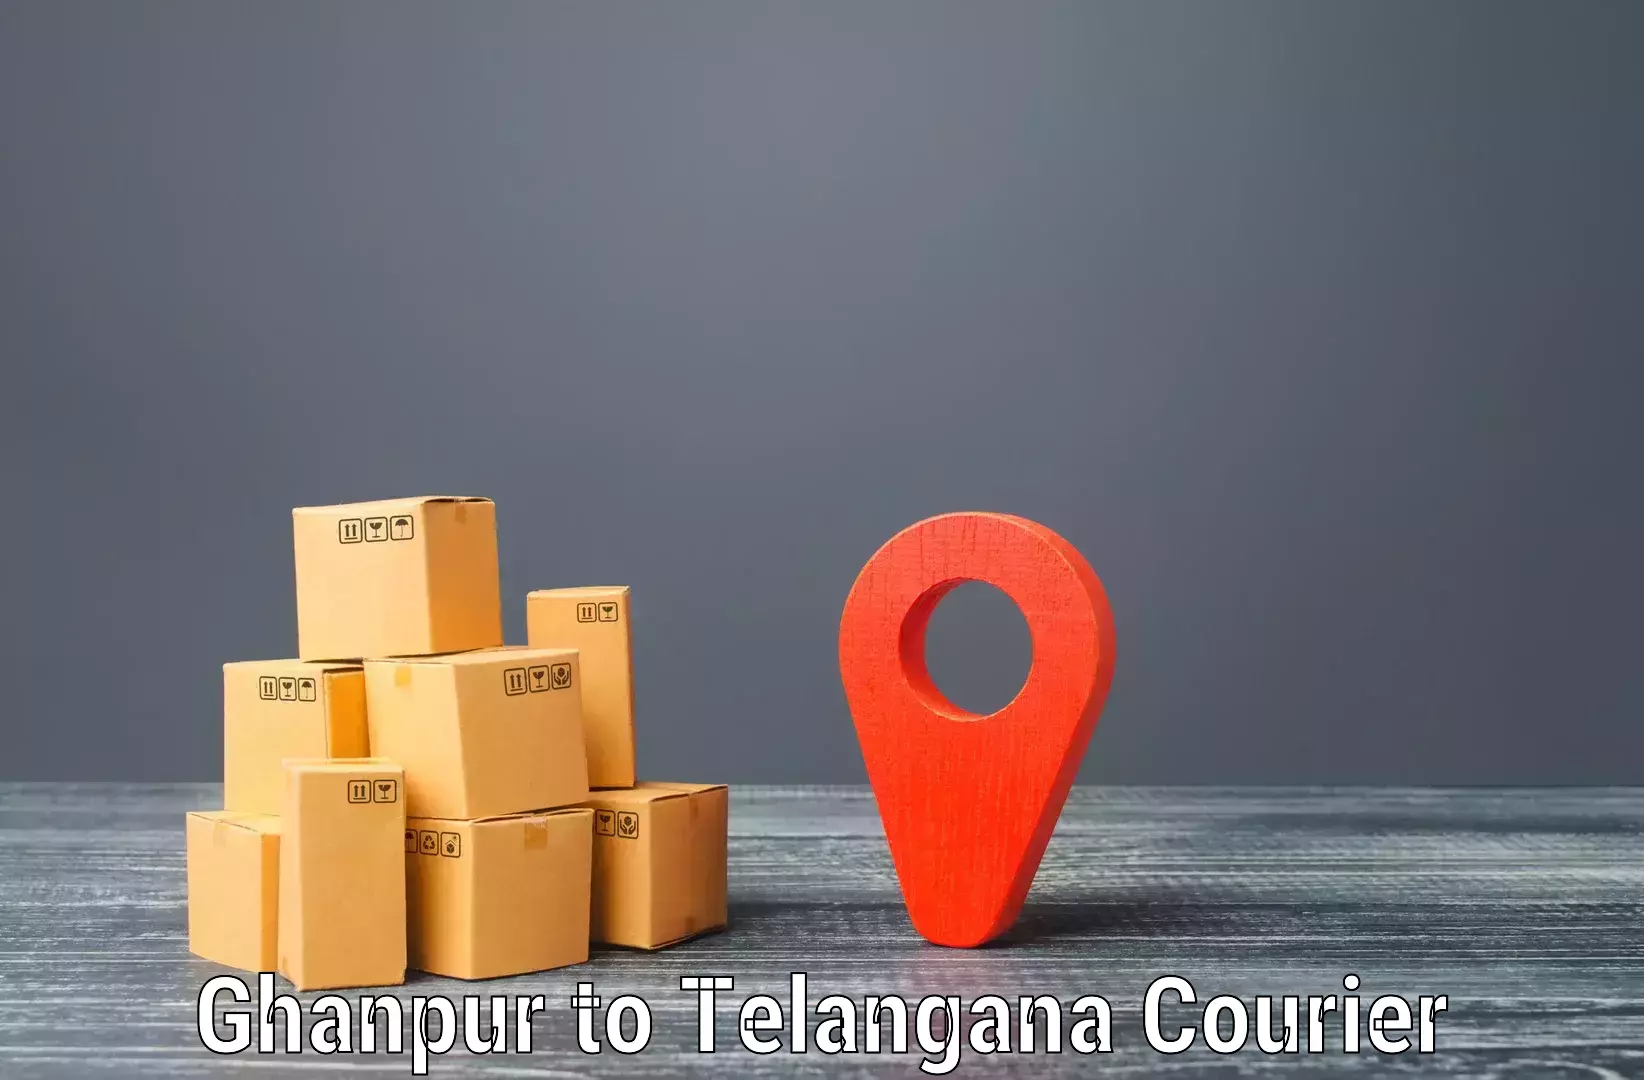 Residential courier service Ghanpur to Cherla